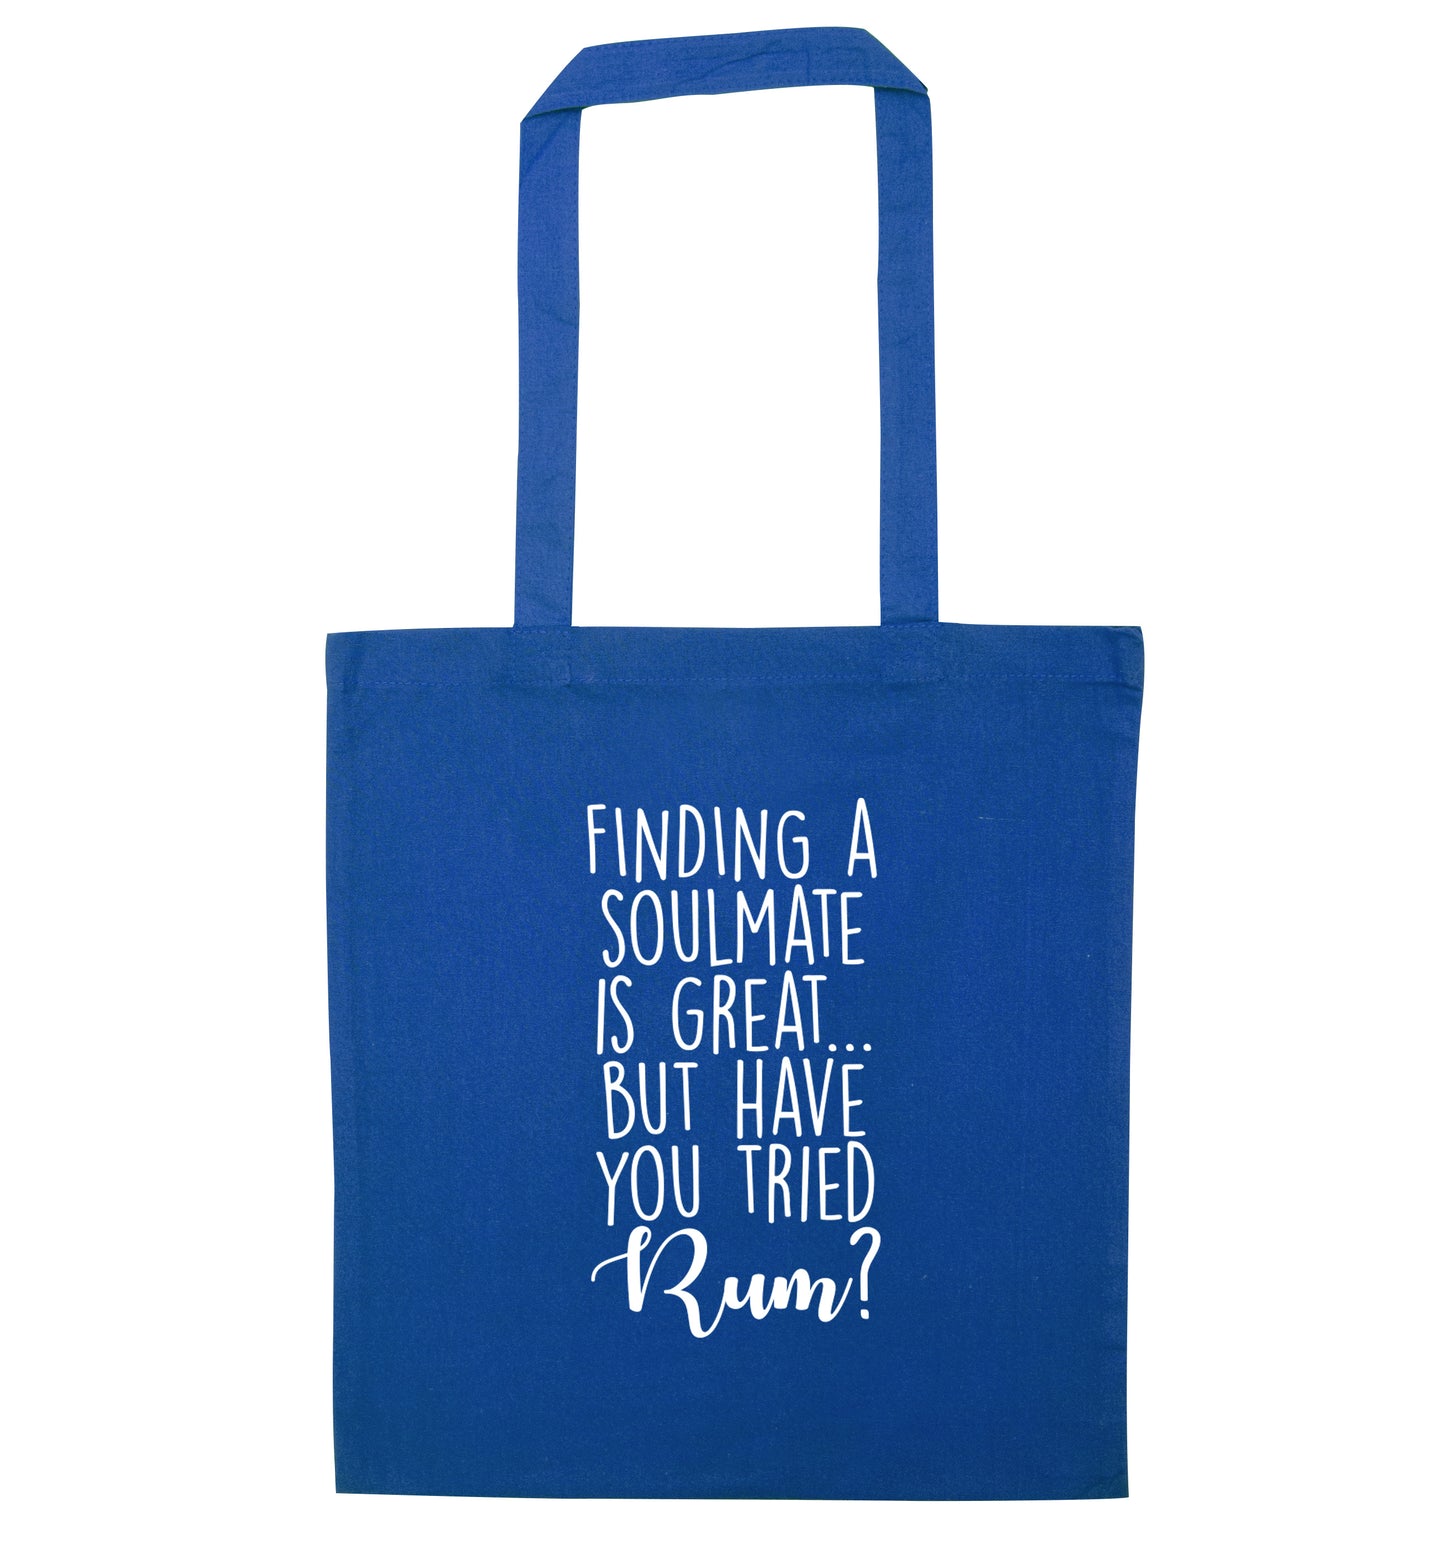 Finding a soulmate is great but have you tried rum? blue tote bag